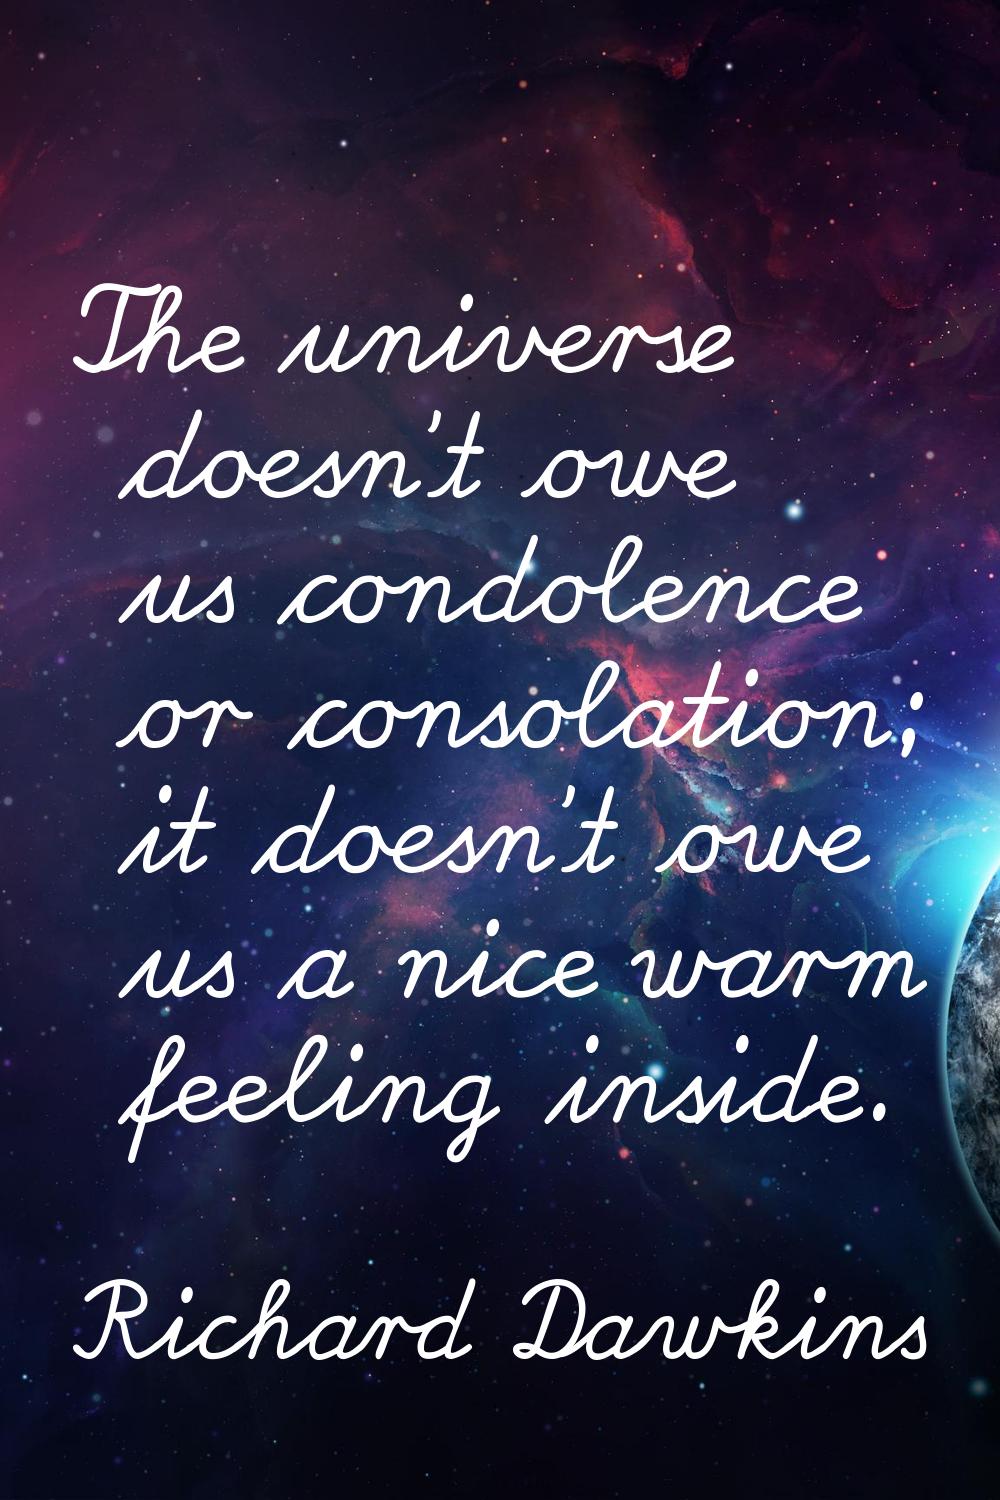 The universe doesn't owe us condolence or consolation; it doesn't owe us a nice warm feeling inside